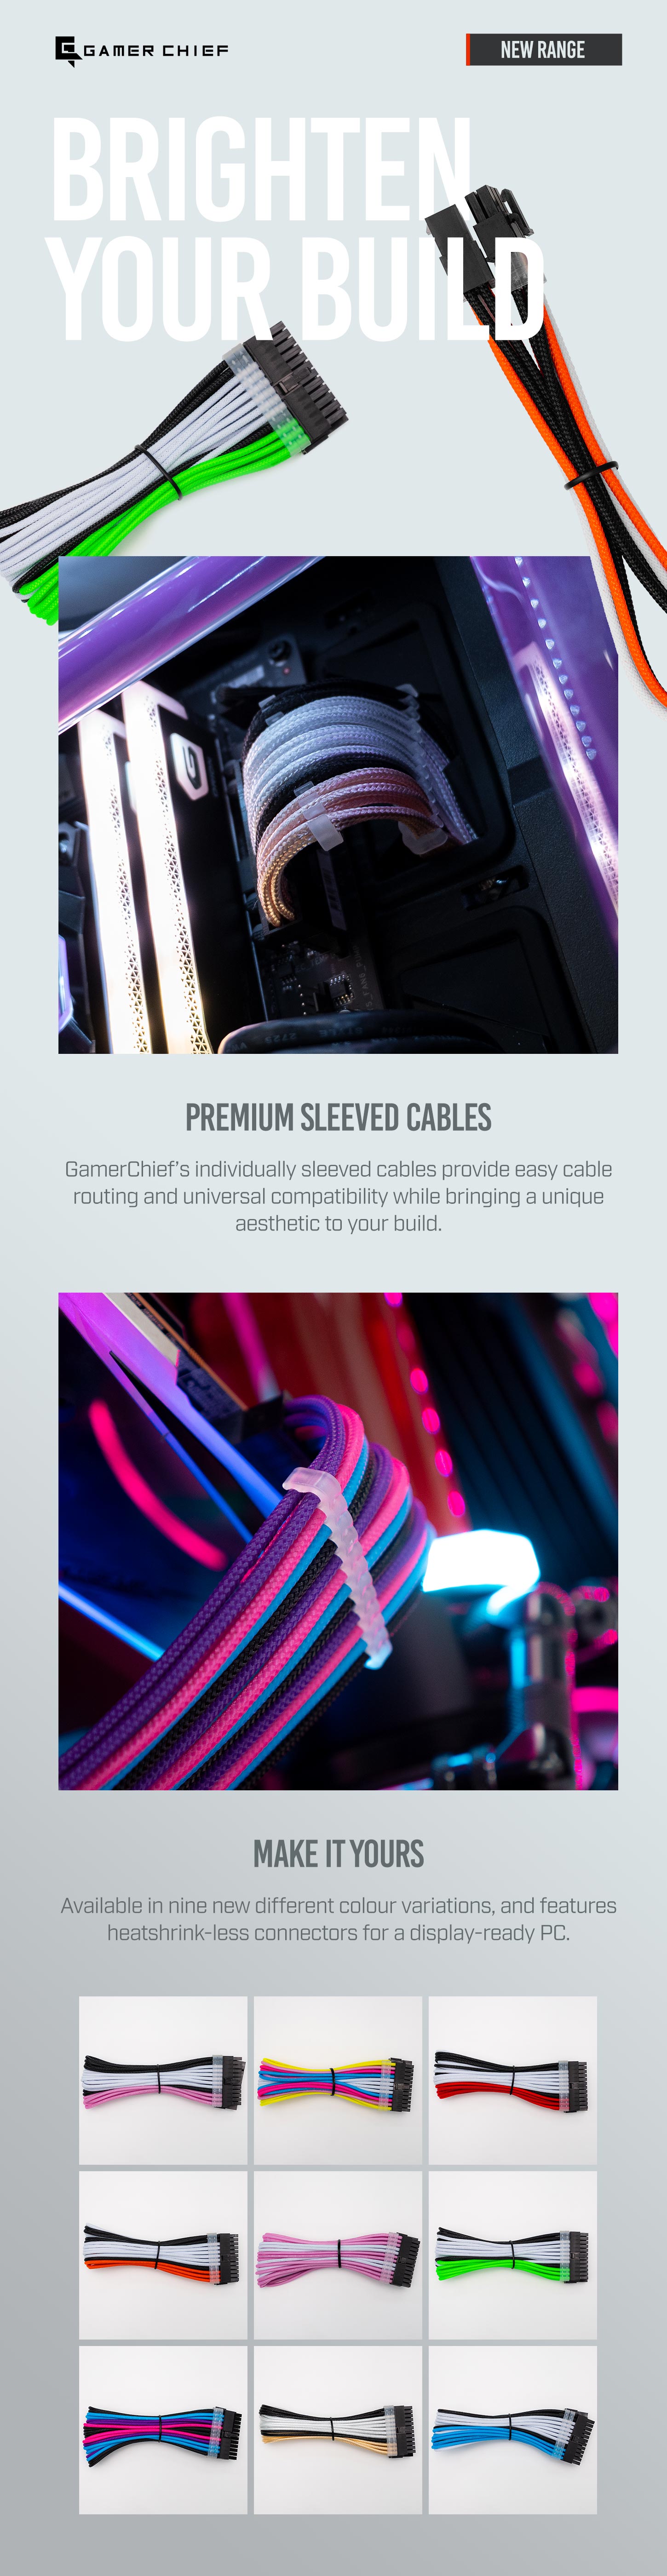 A large marketing image providing additional information about the product GamerChief Elite Series 24-Pin ATX 30cm Sleeved Extension Cable (Gold/White/Black) - Additional alt info not provided